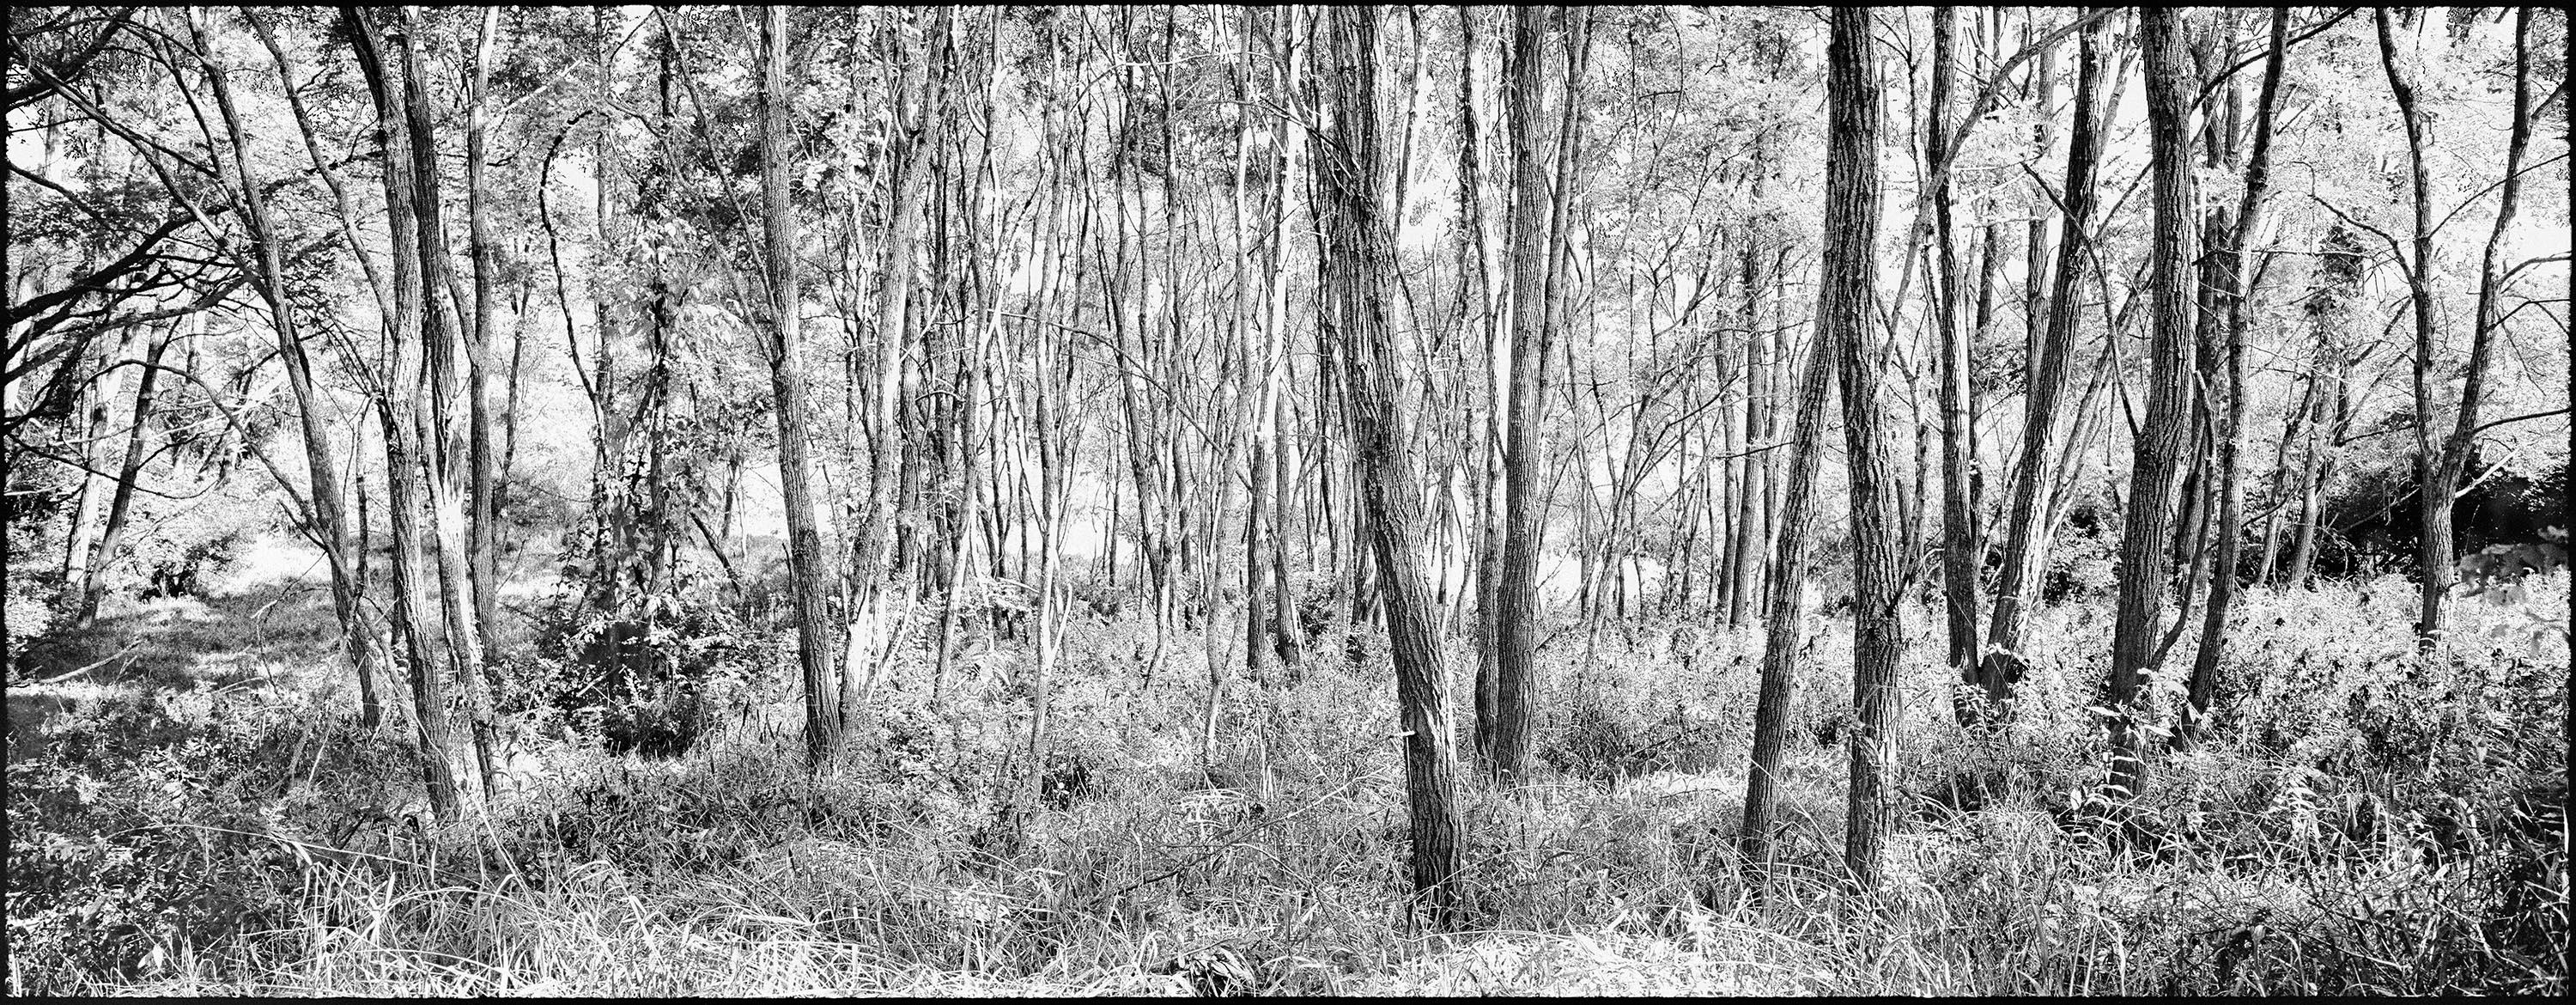 Woodland - panoramic black and white image with trees, fine art photography 2021